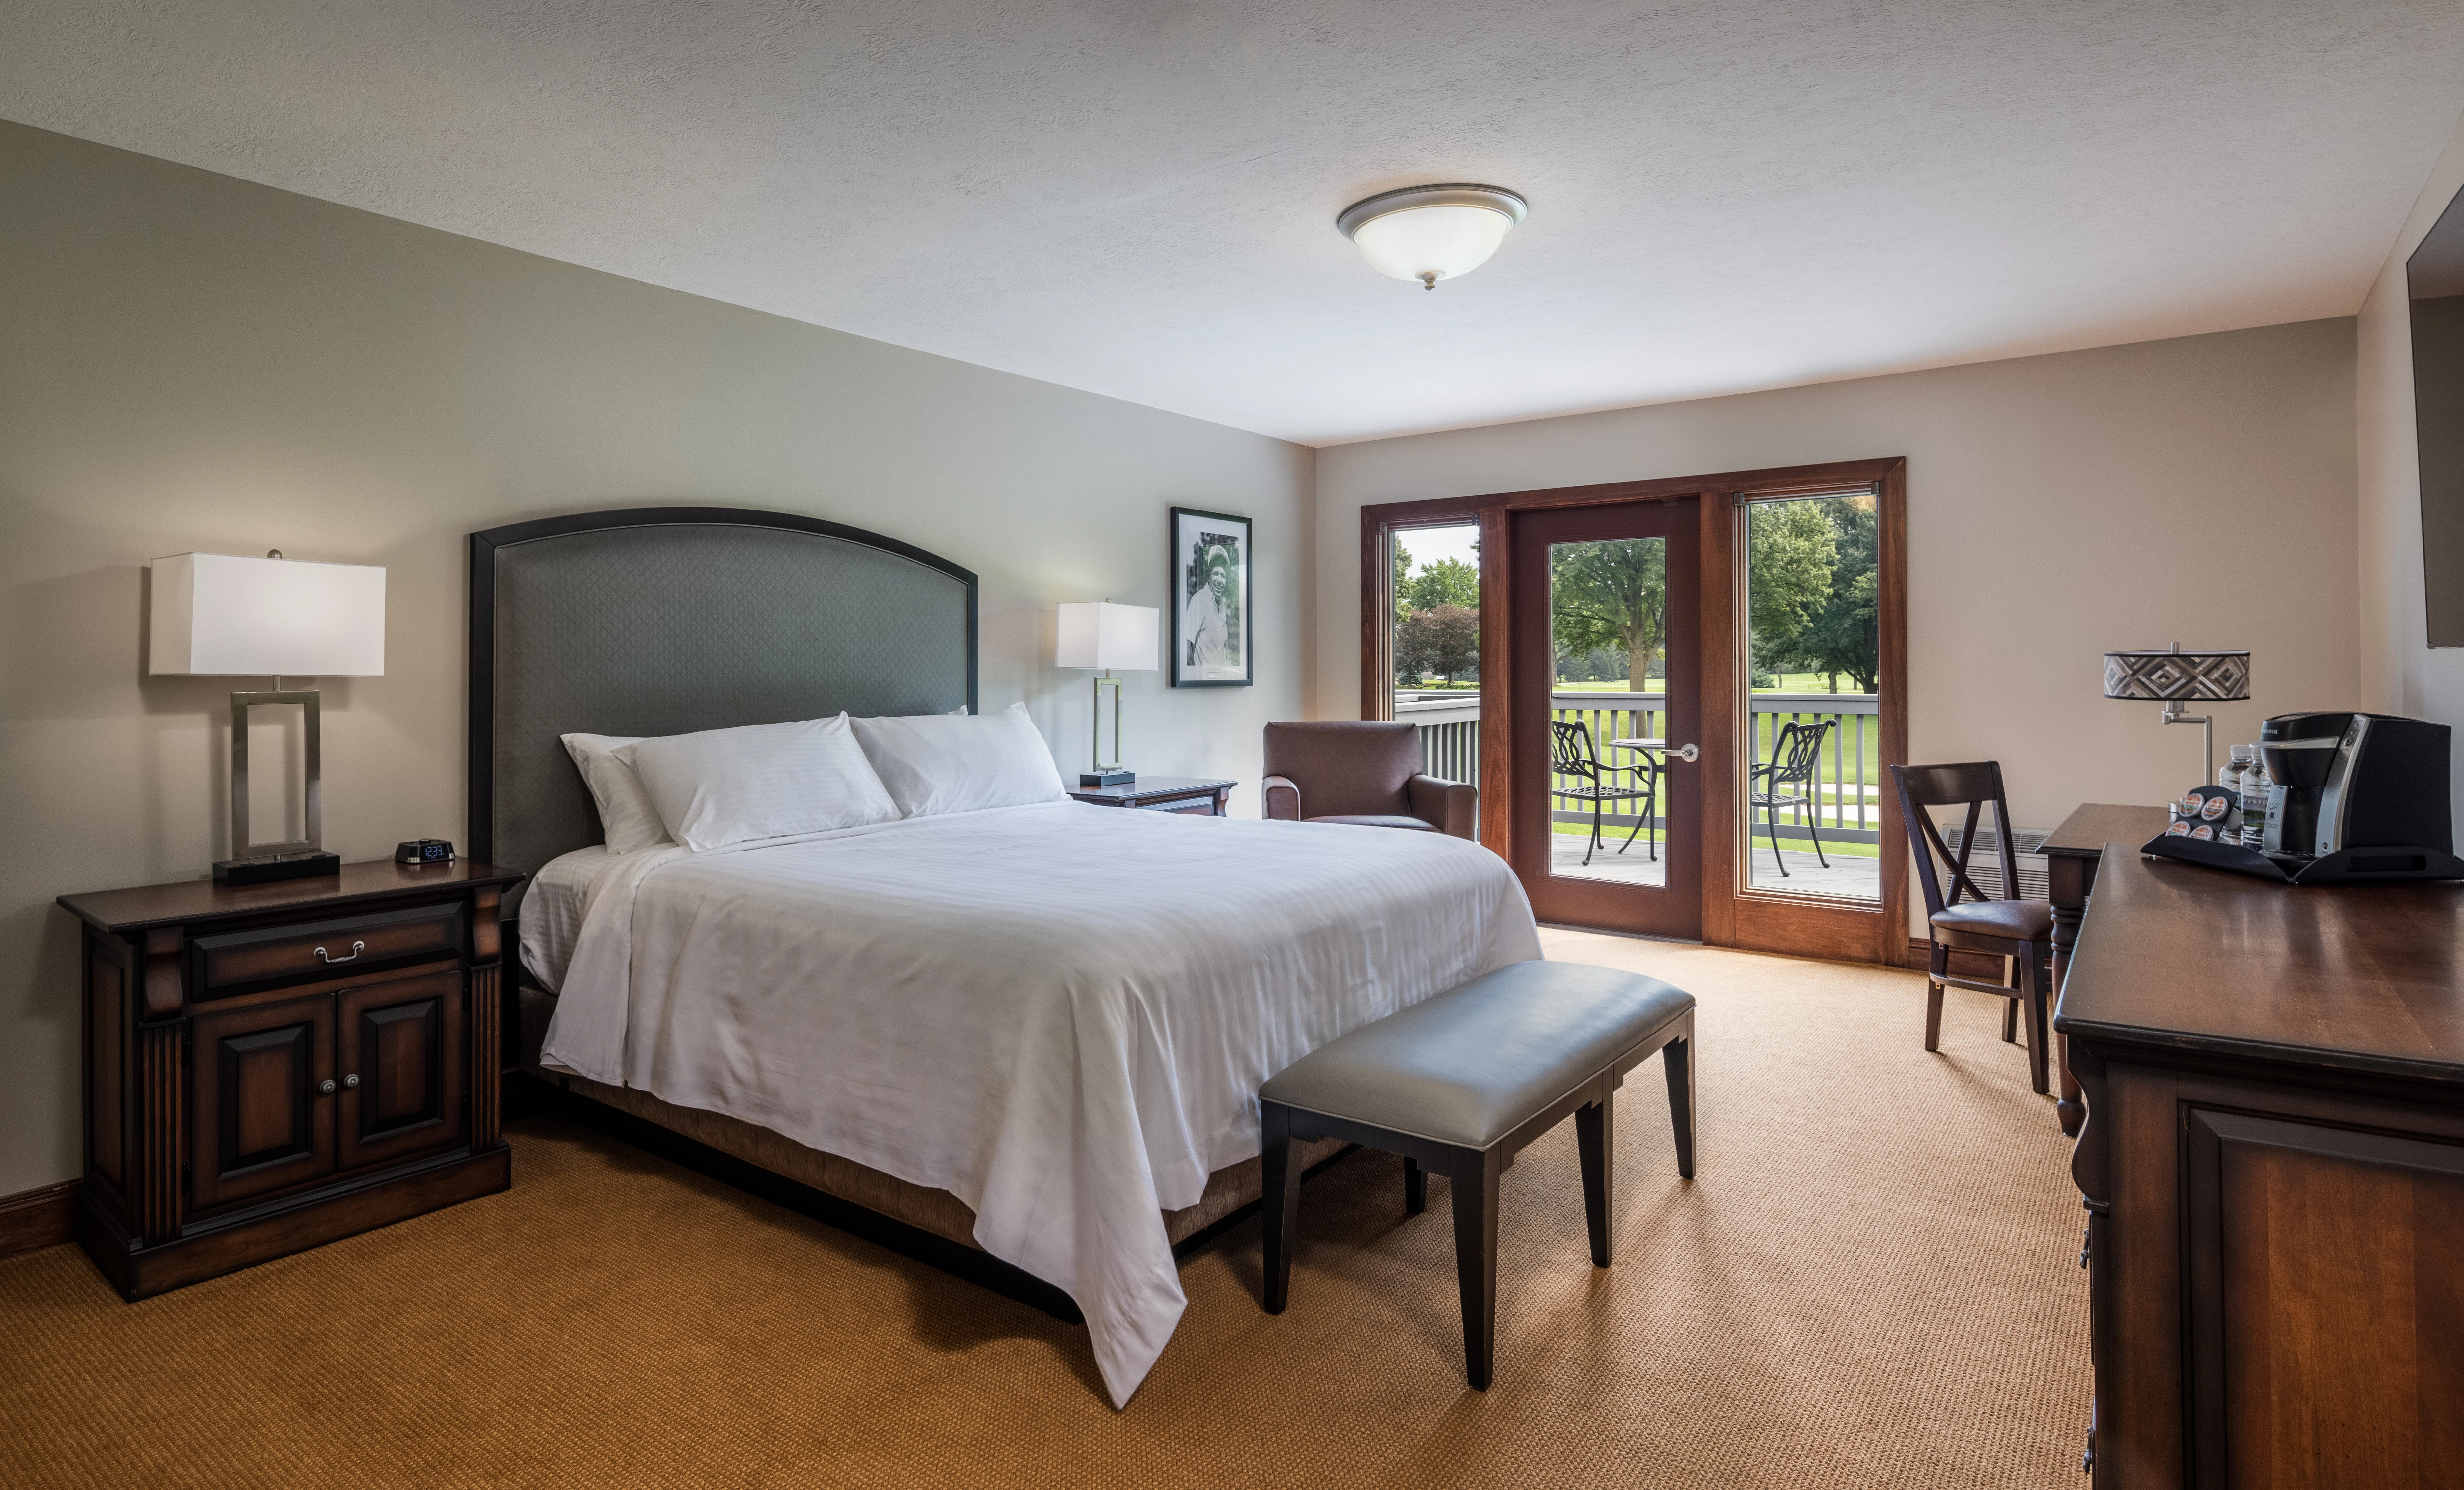 Accomodations at the Firestone Country Club